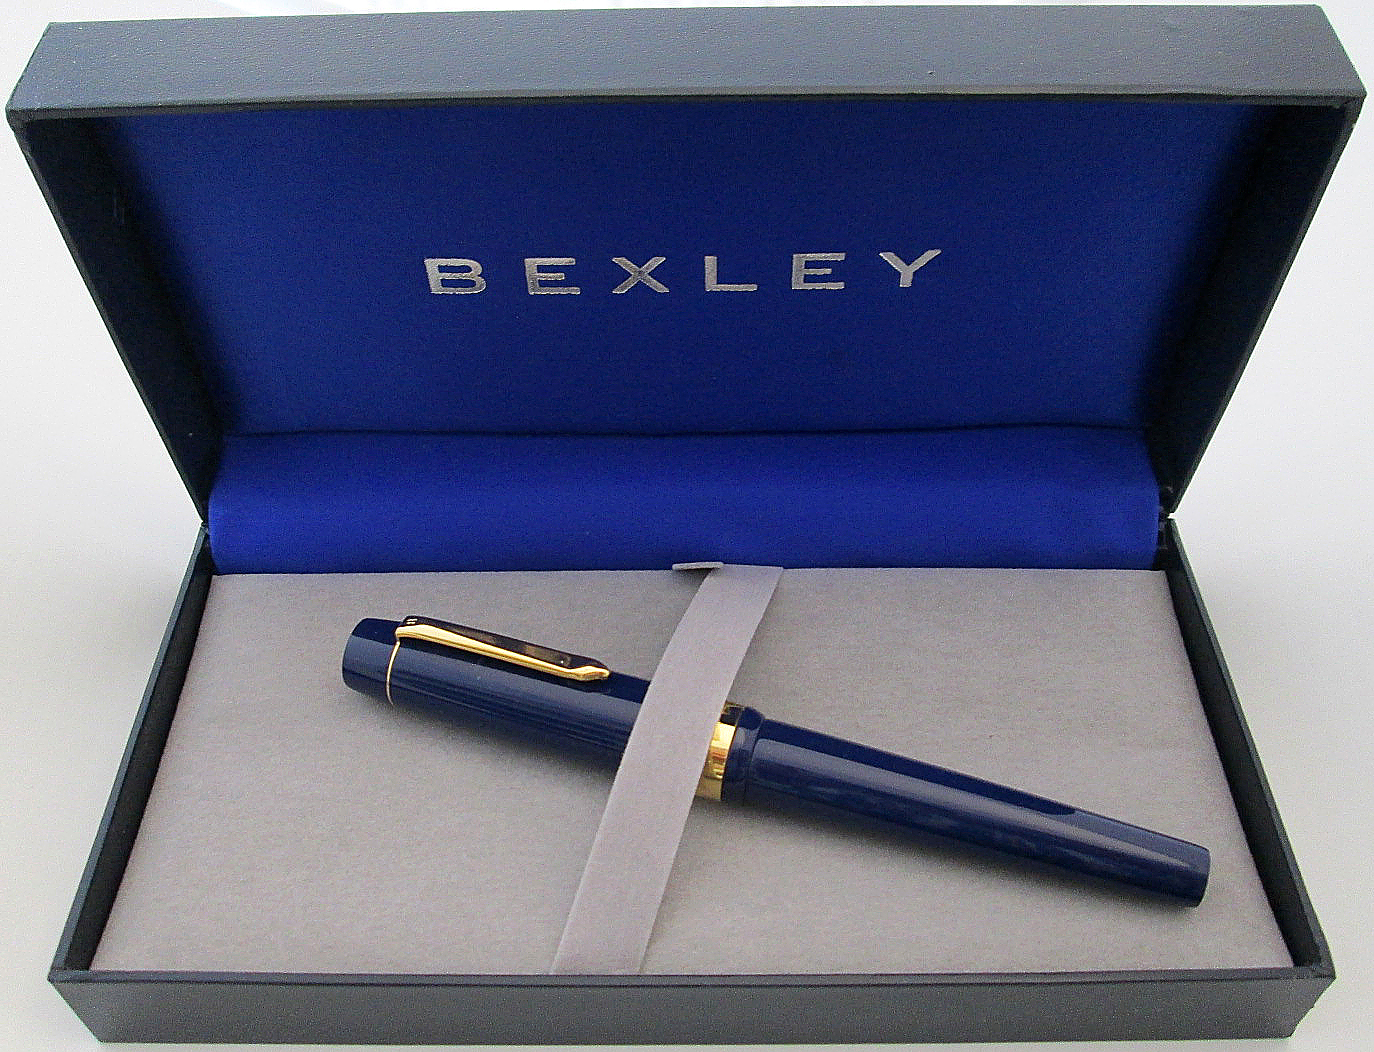 Bexley Pen, you know the quality and care used in our design and manufacturing process.  These high quality pens are made from metal and acrylics, with steel and gold nibs, and are piston filled. 